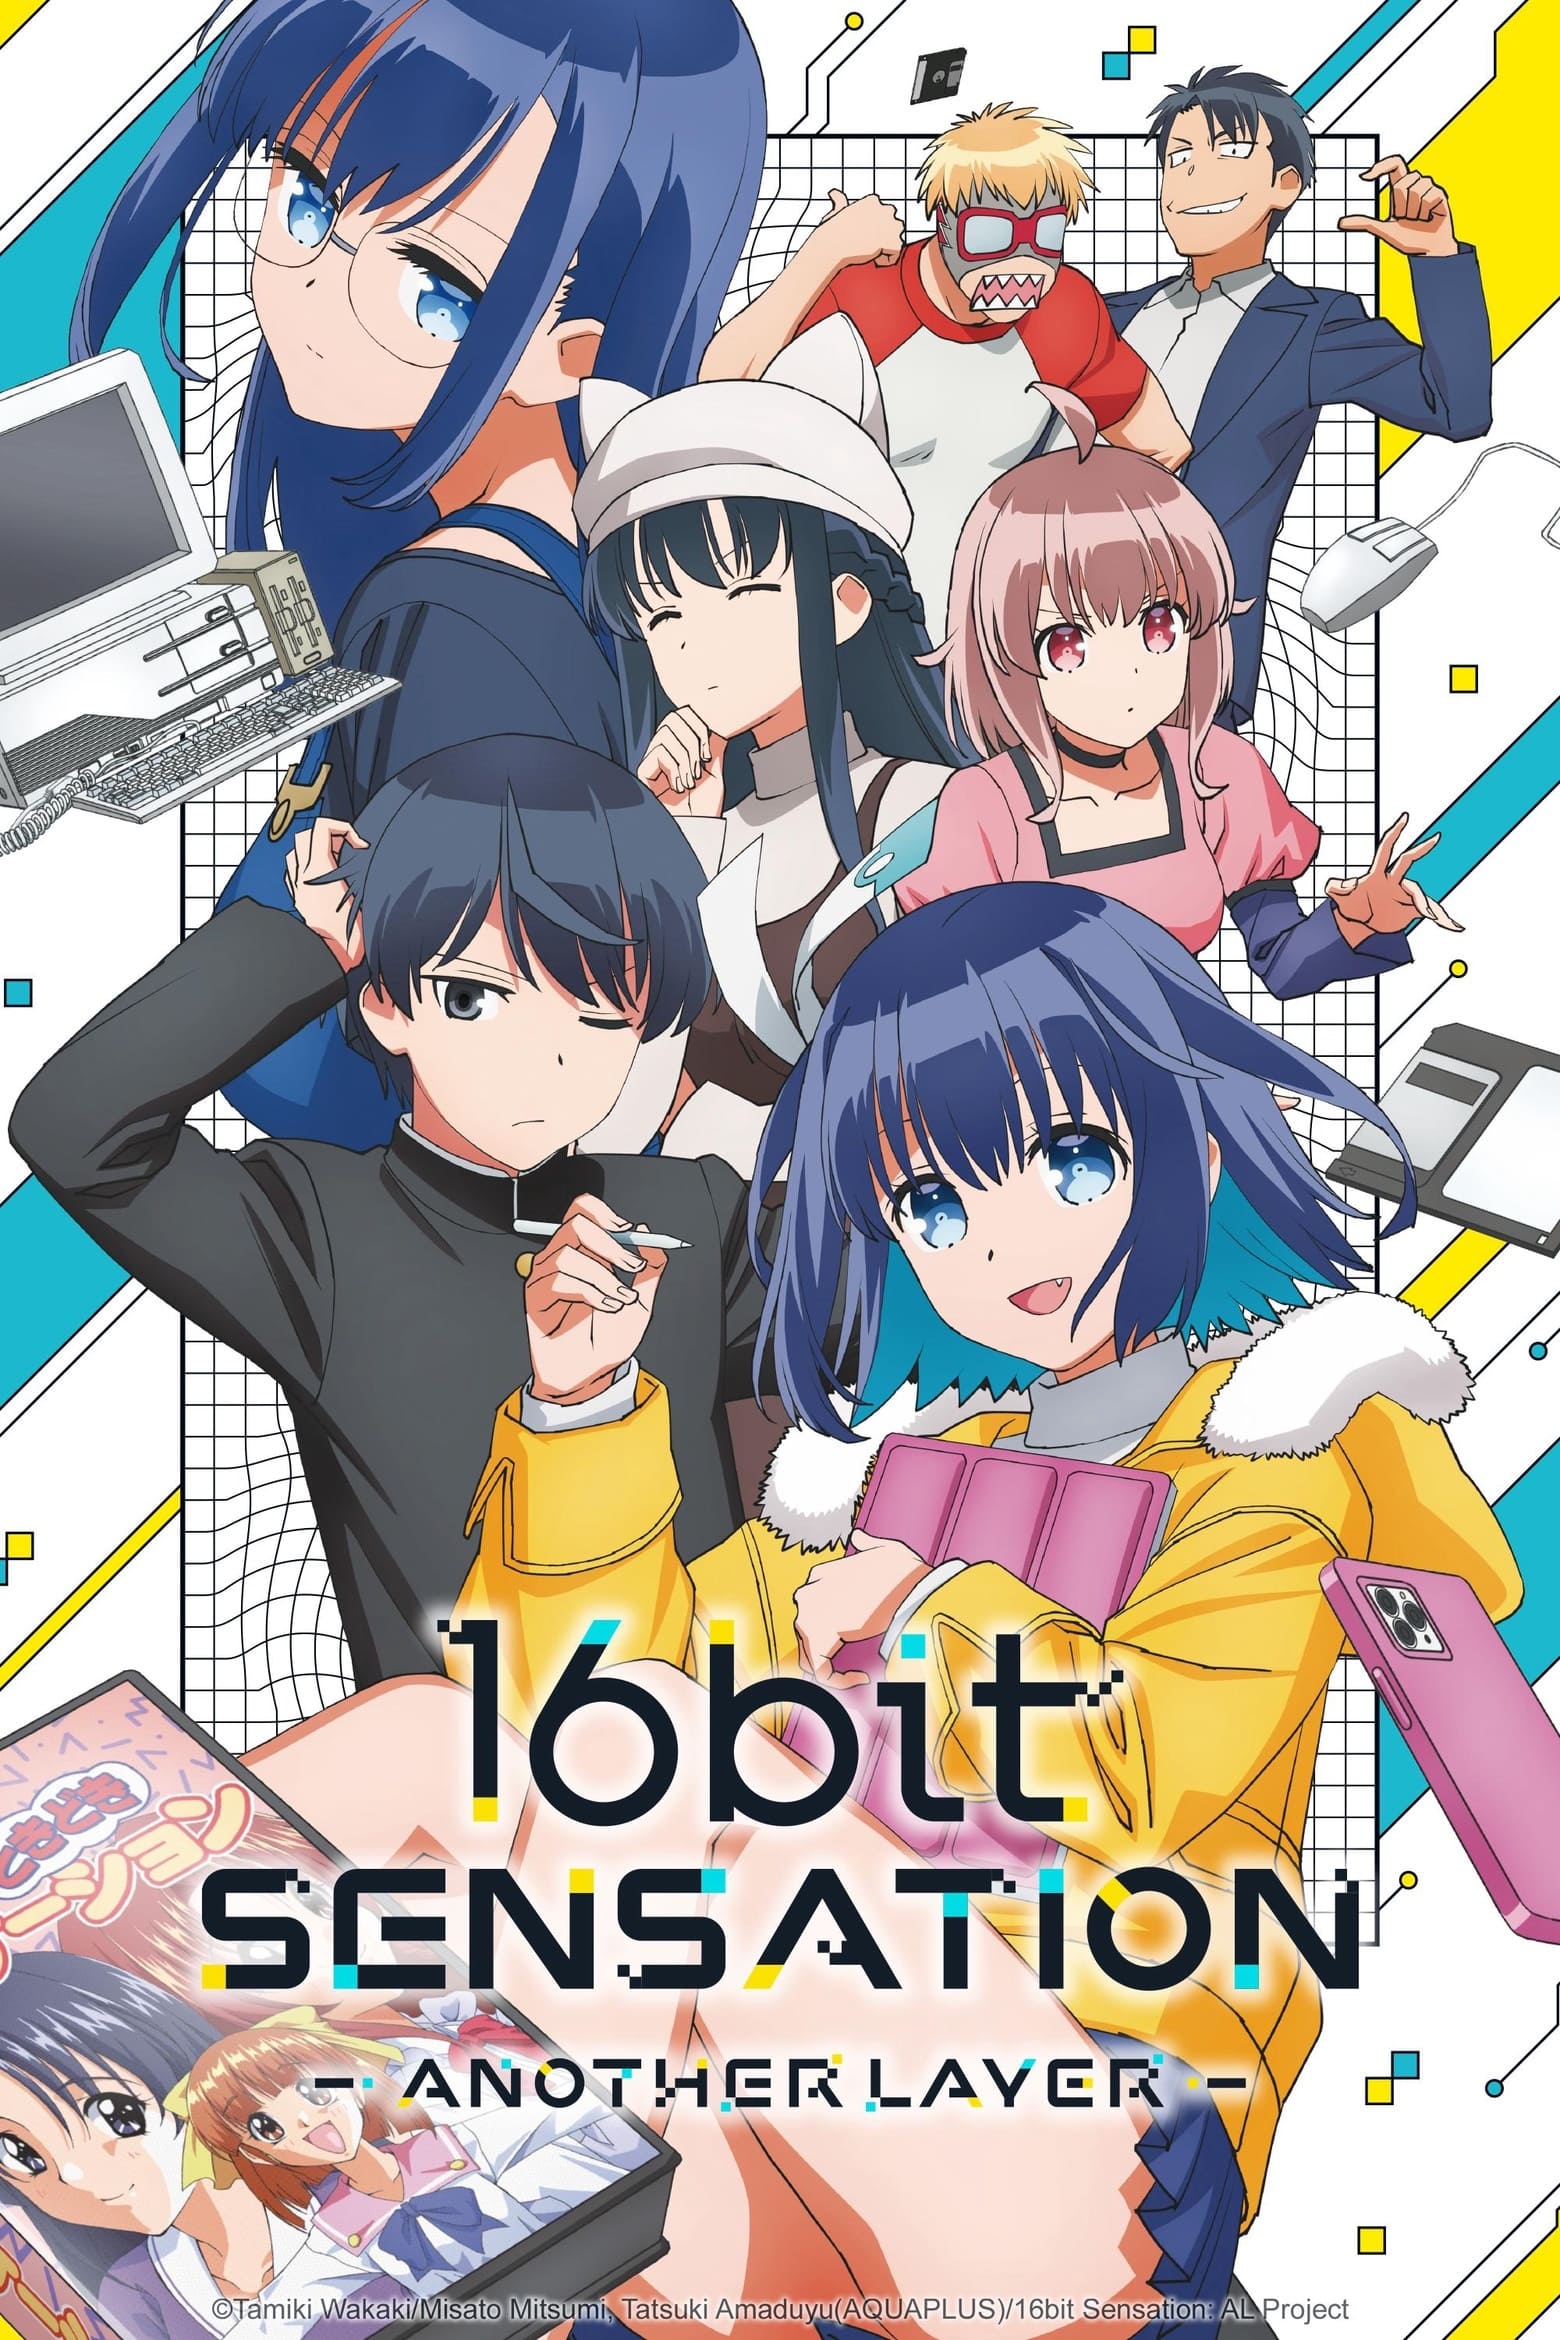 TV ratings for 16bit Sensation: Another Layer (16bitセンセーション ANOTHER LAYER) in Australia. Tokyo MX TV series